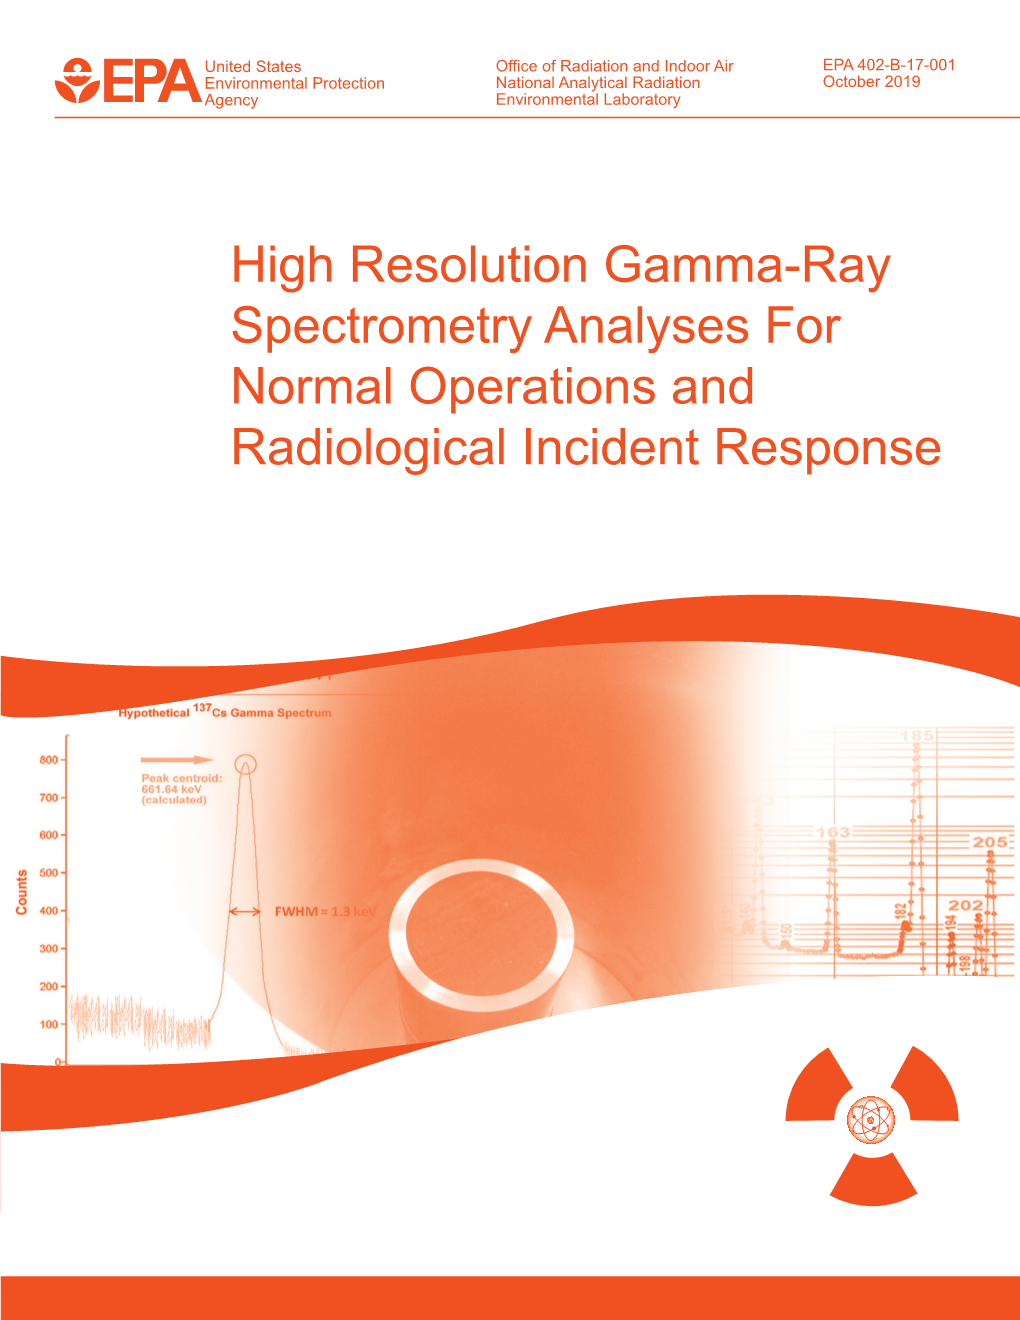 High Resolution Gamma-Ray Spectrometry Analyses for Normal Operations and Radiological Incident Response